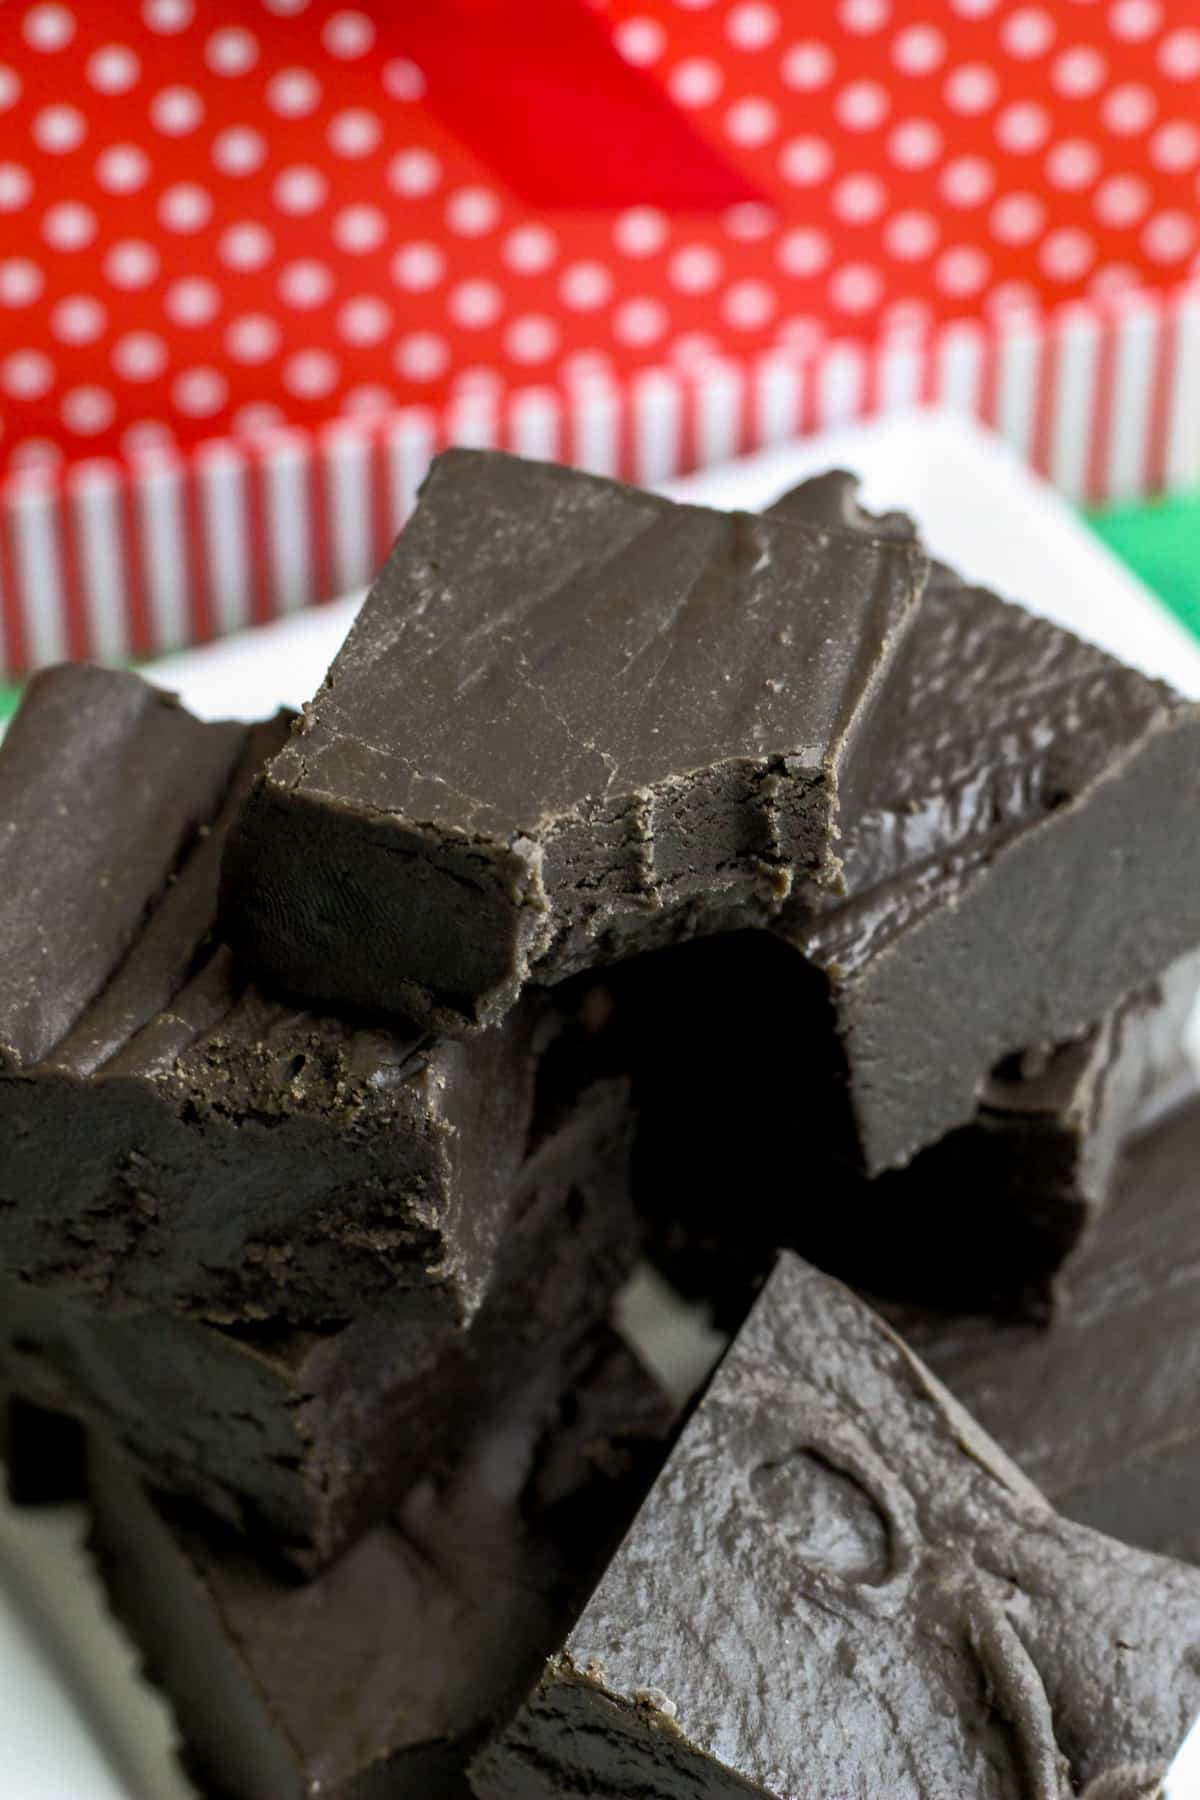 Pieces of black fudge stacked on white platter with christmas decor in background.